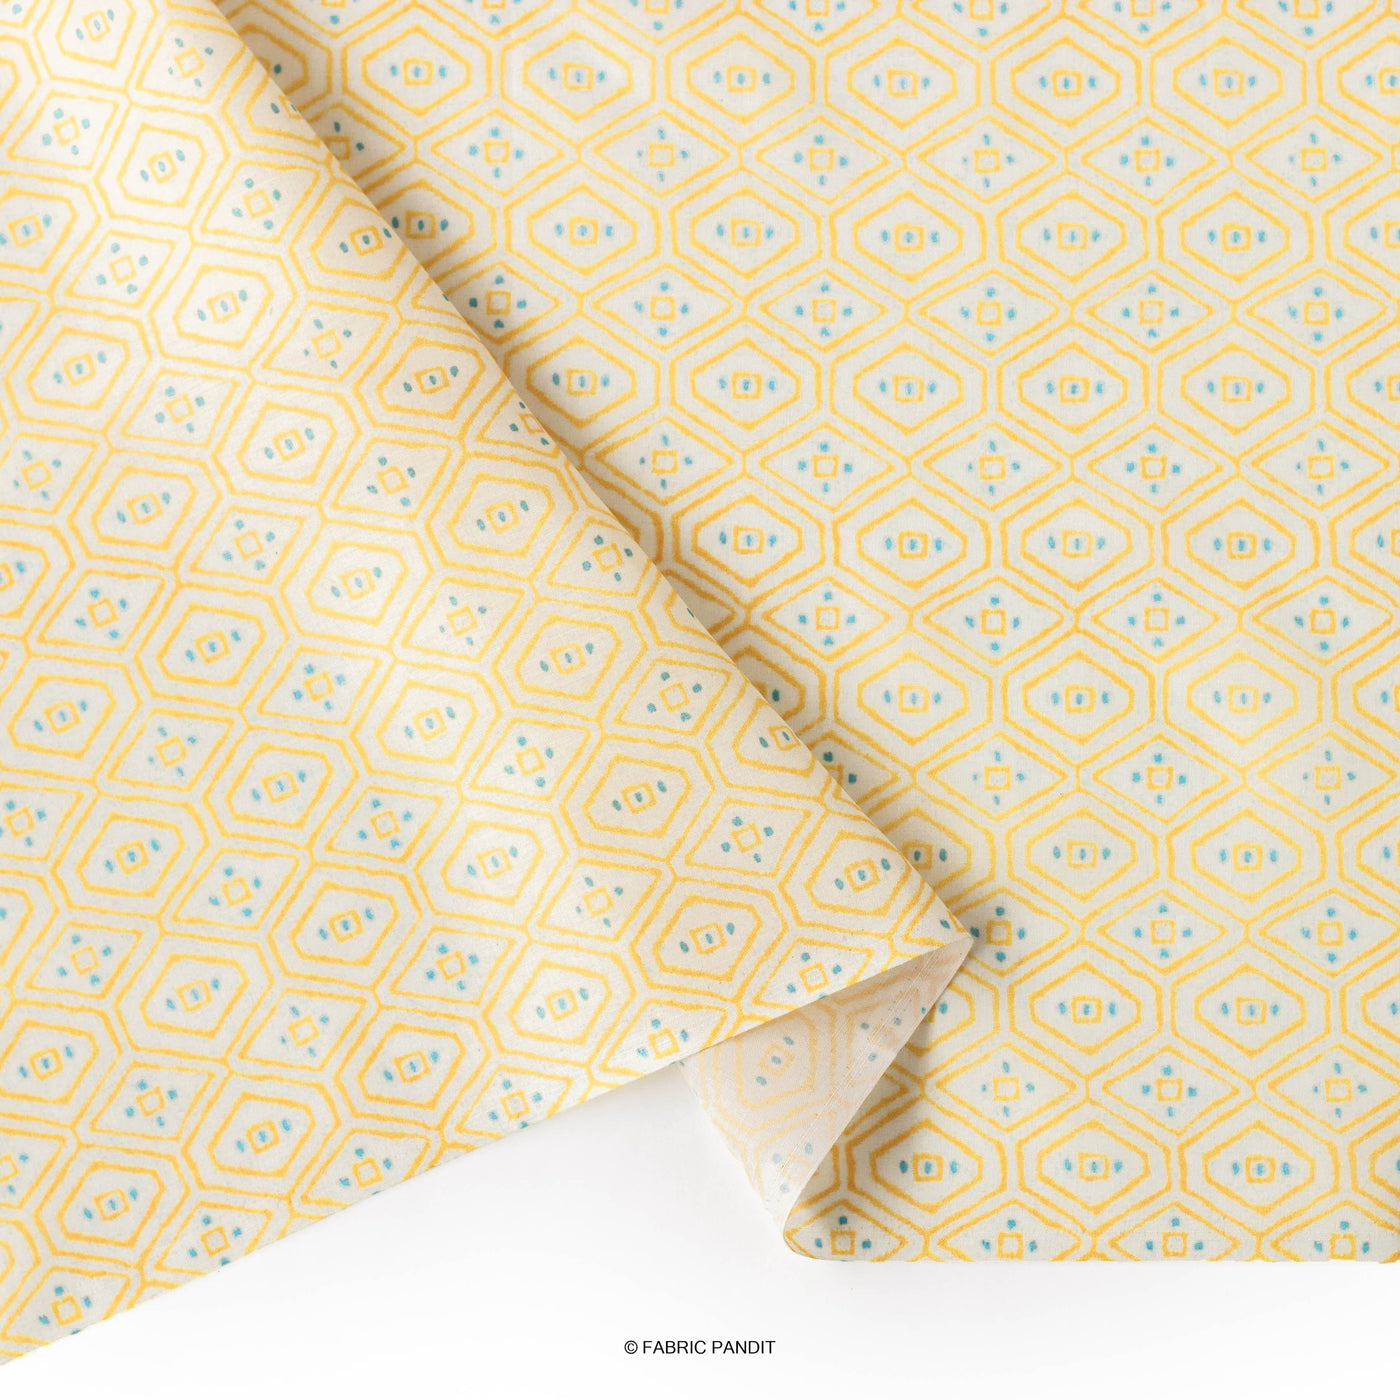 Fabric Pandit Cut Piece 0.25M (CUT PIECE) Lemon Yellow Abstract Honey Comb Pattern Digital Printed Cambric Fabric (Width 43 Inches)